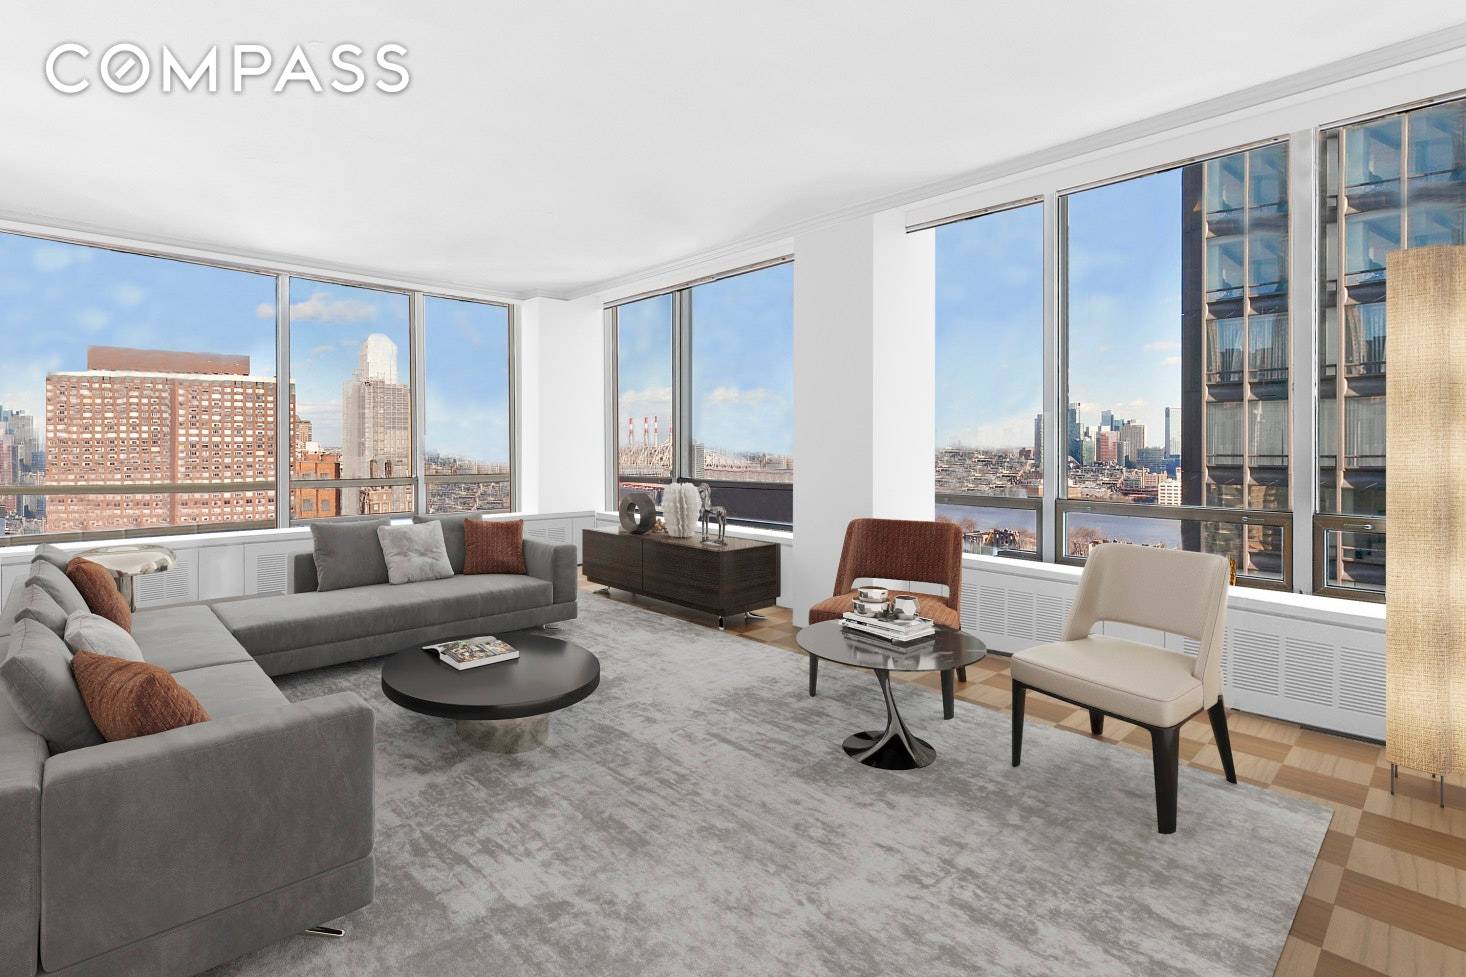 Palatial living in this high floor corner 6 room cooperative at 860 United Nations Plaza, the renowned building designed by the acclaimed master architects Harrison AND Abramovitz.